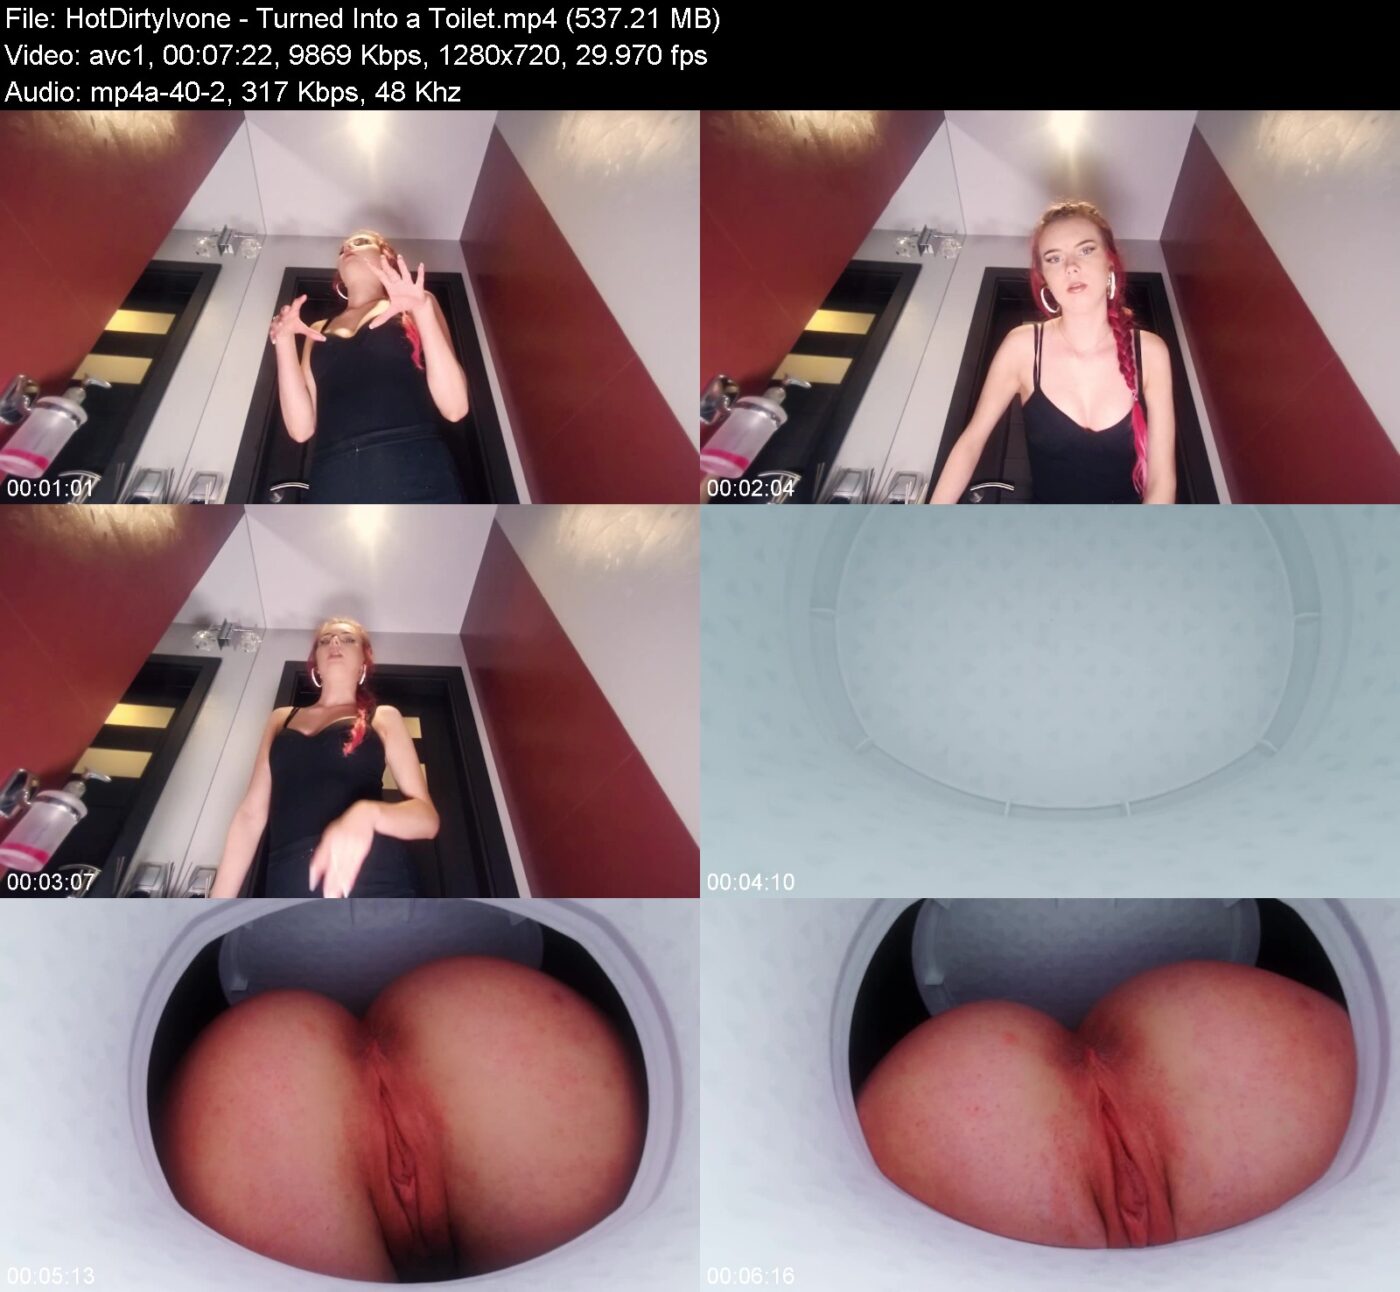 Actress: HotDirtyIvone. Title and Studio: Turned Into a Toilet